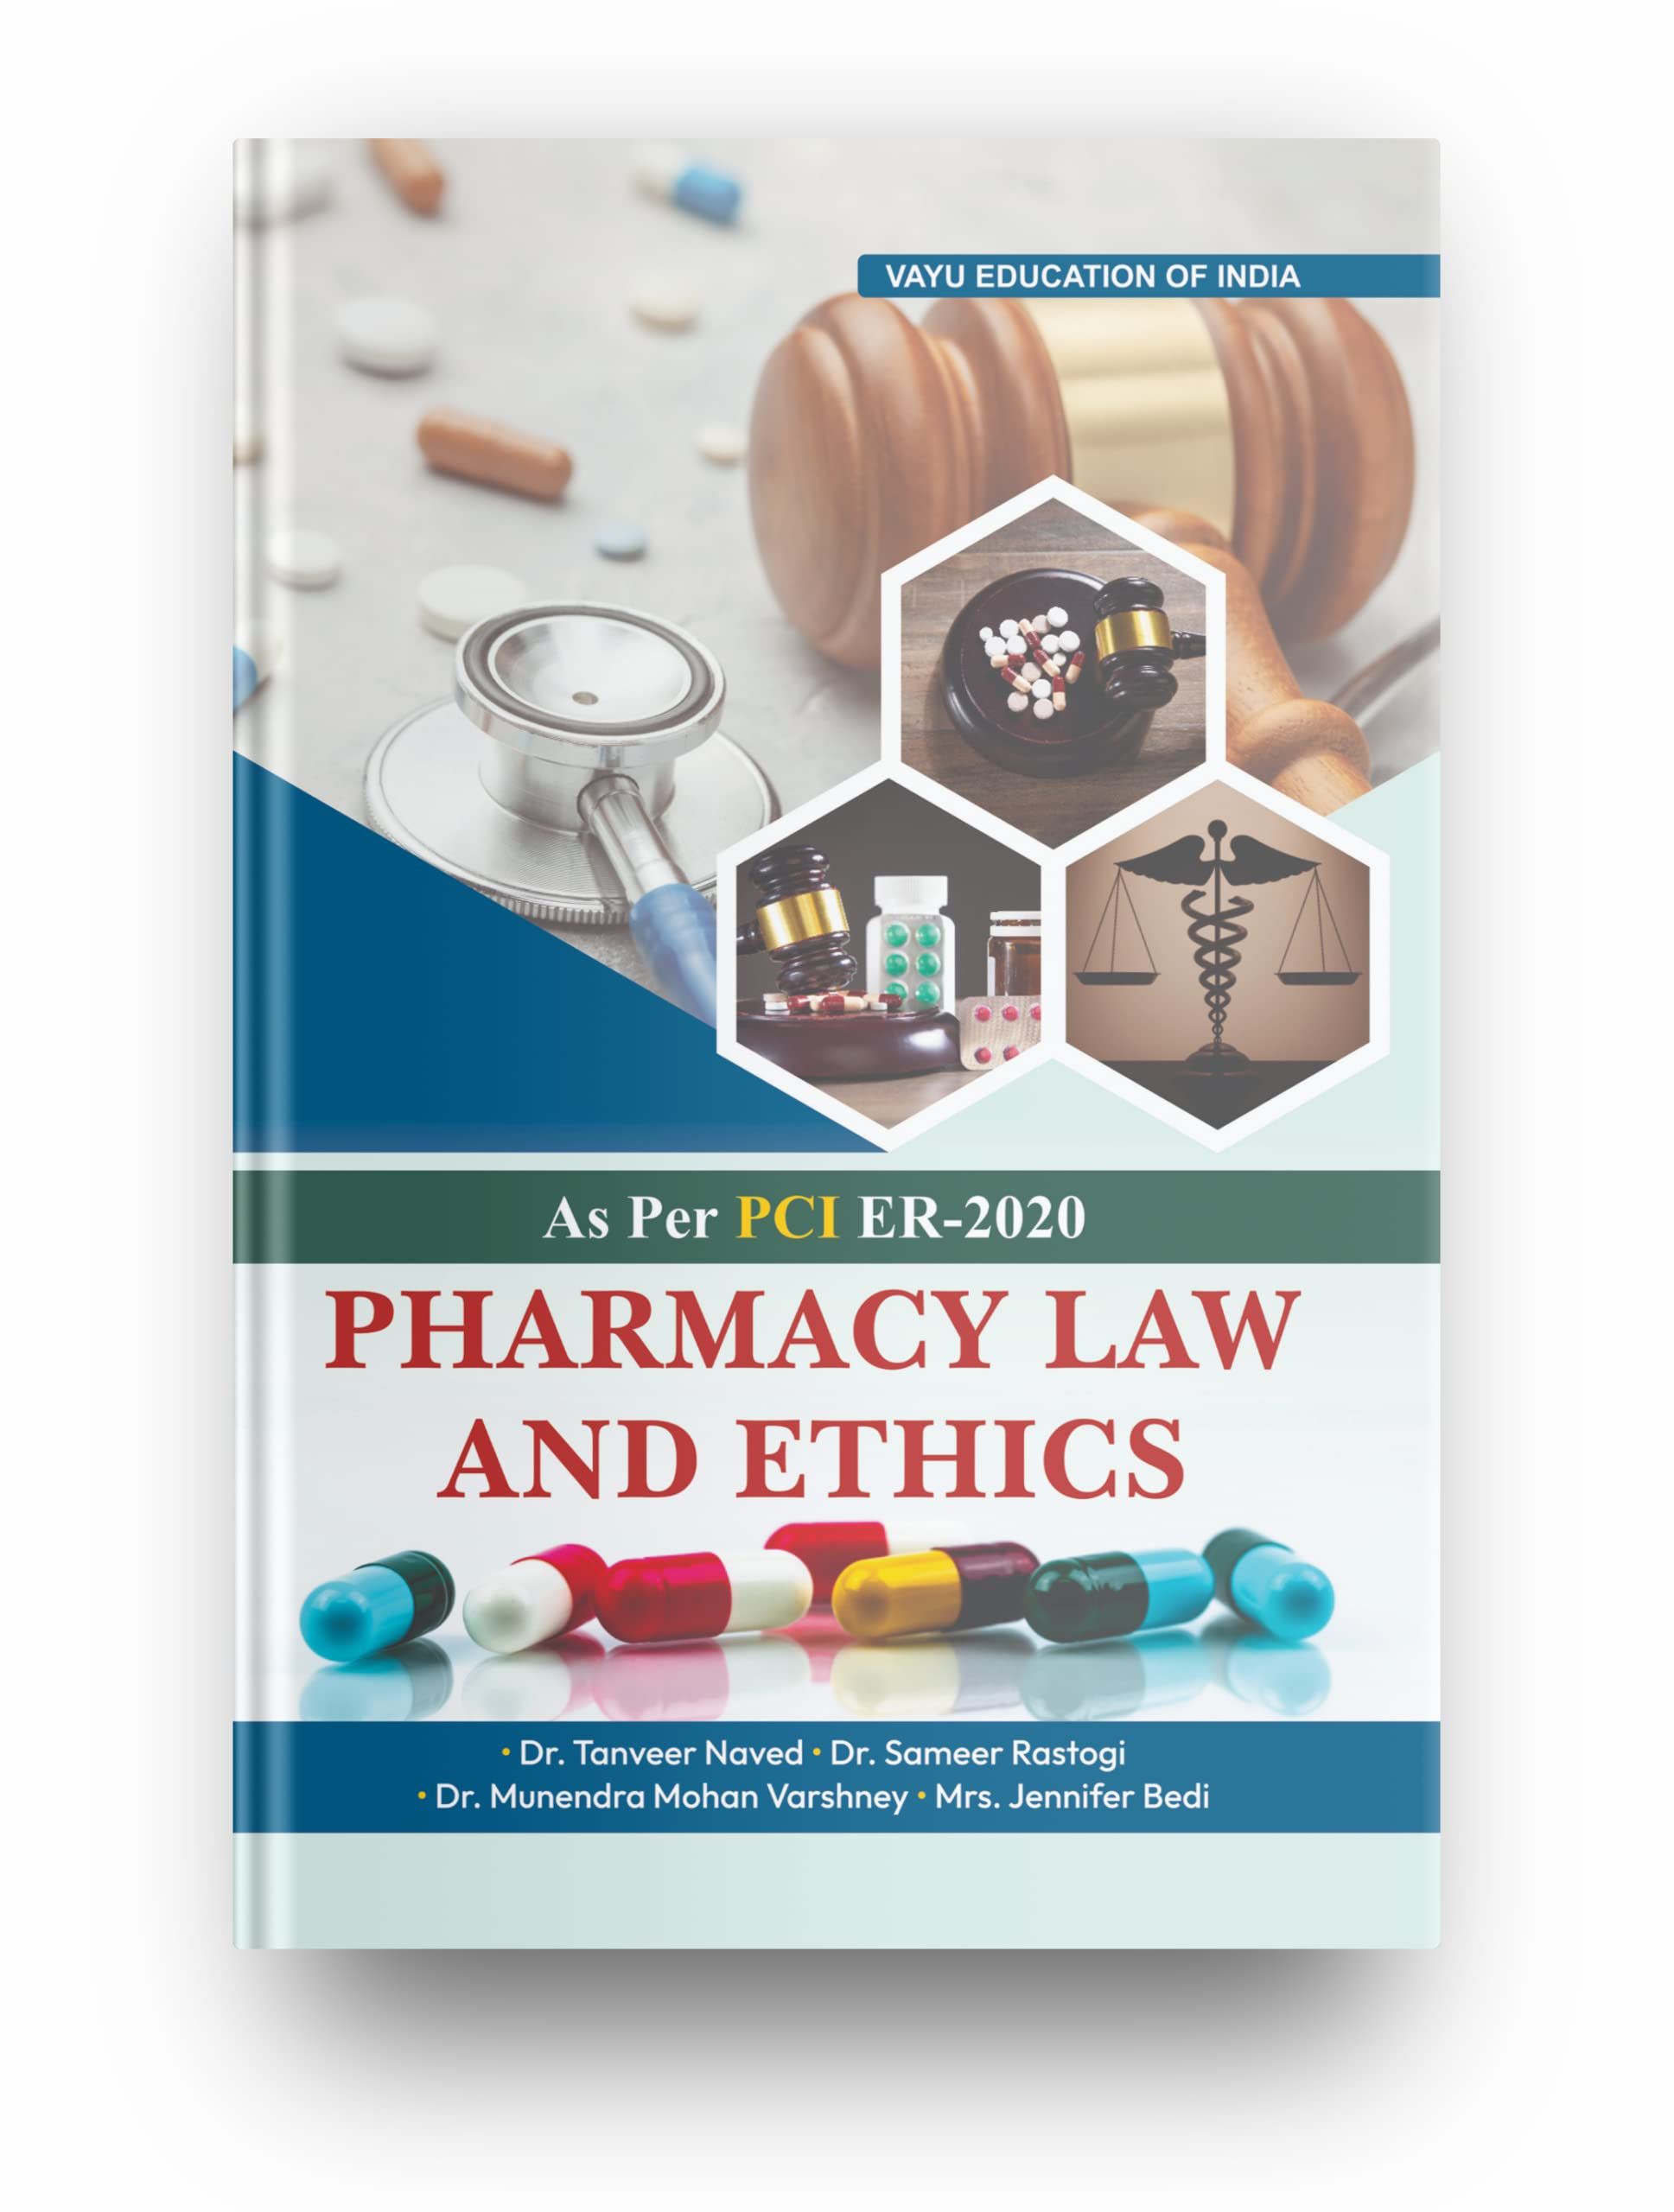     			PHARMACY LAW AND ETHICS "As per PCI ER-2020" (Second Year Diploma In Pharmacy)